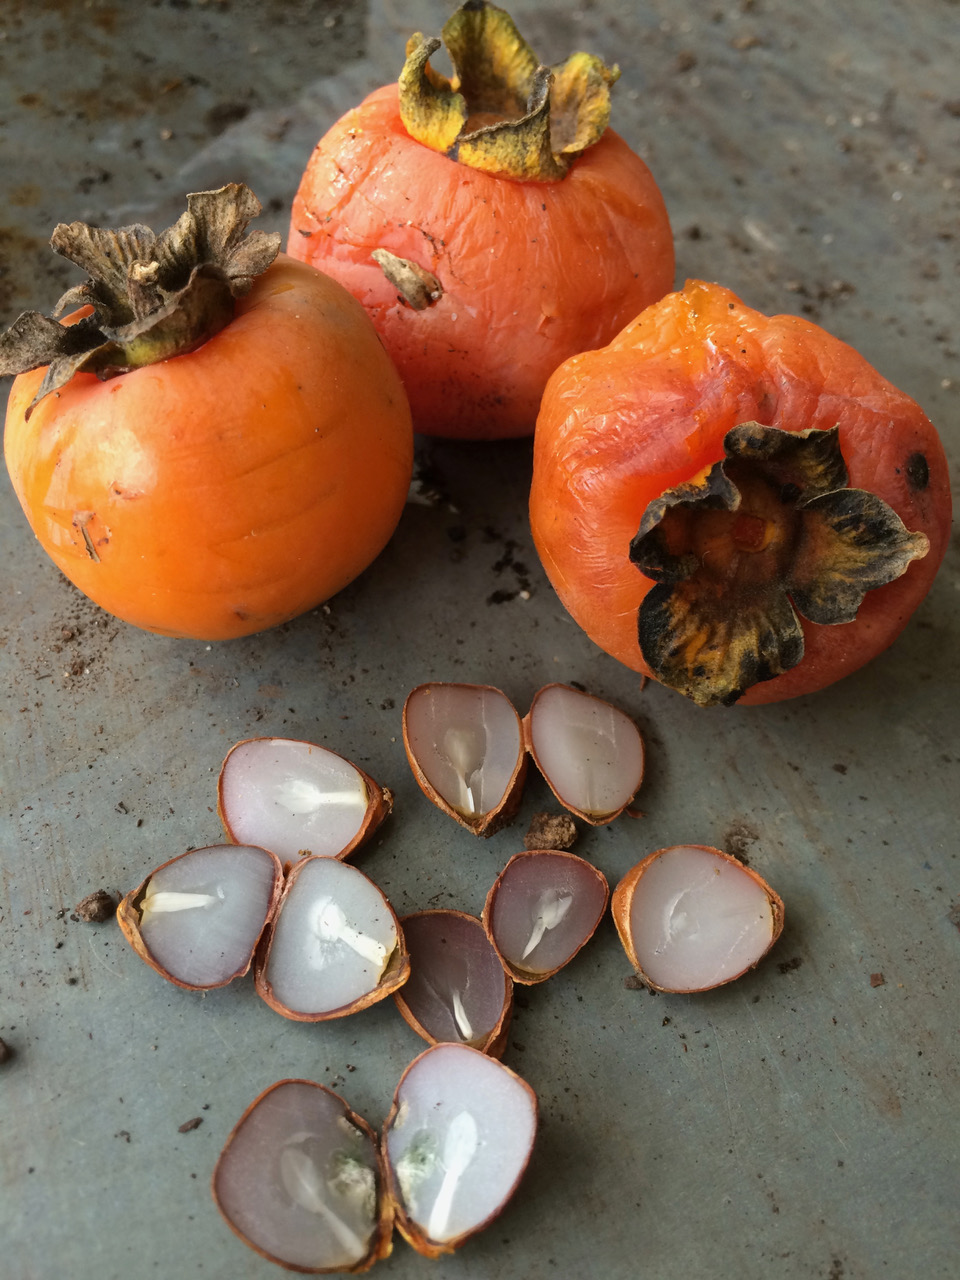 Some people use persimmon seeds to predict the winter. Photo courtesy Chris Wilhoite/soulesgarden.com